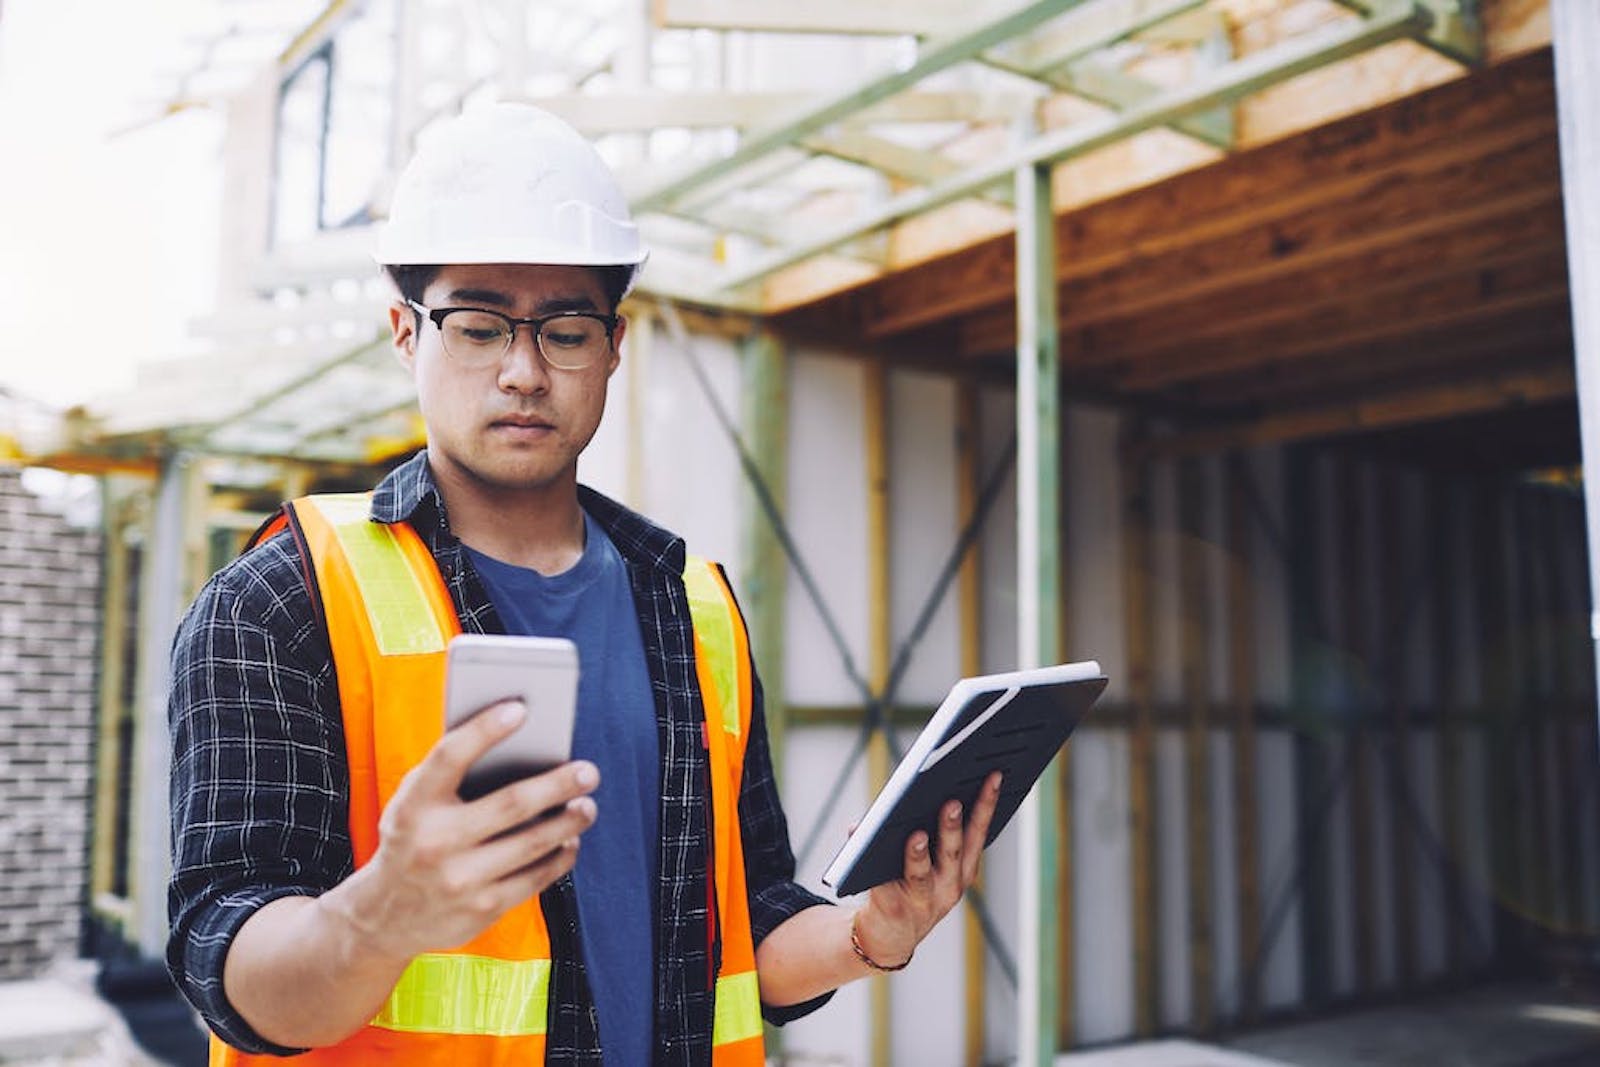 A worker in a safety vest and white hard hat holds a phone in one hand, and a notebook in another